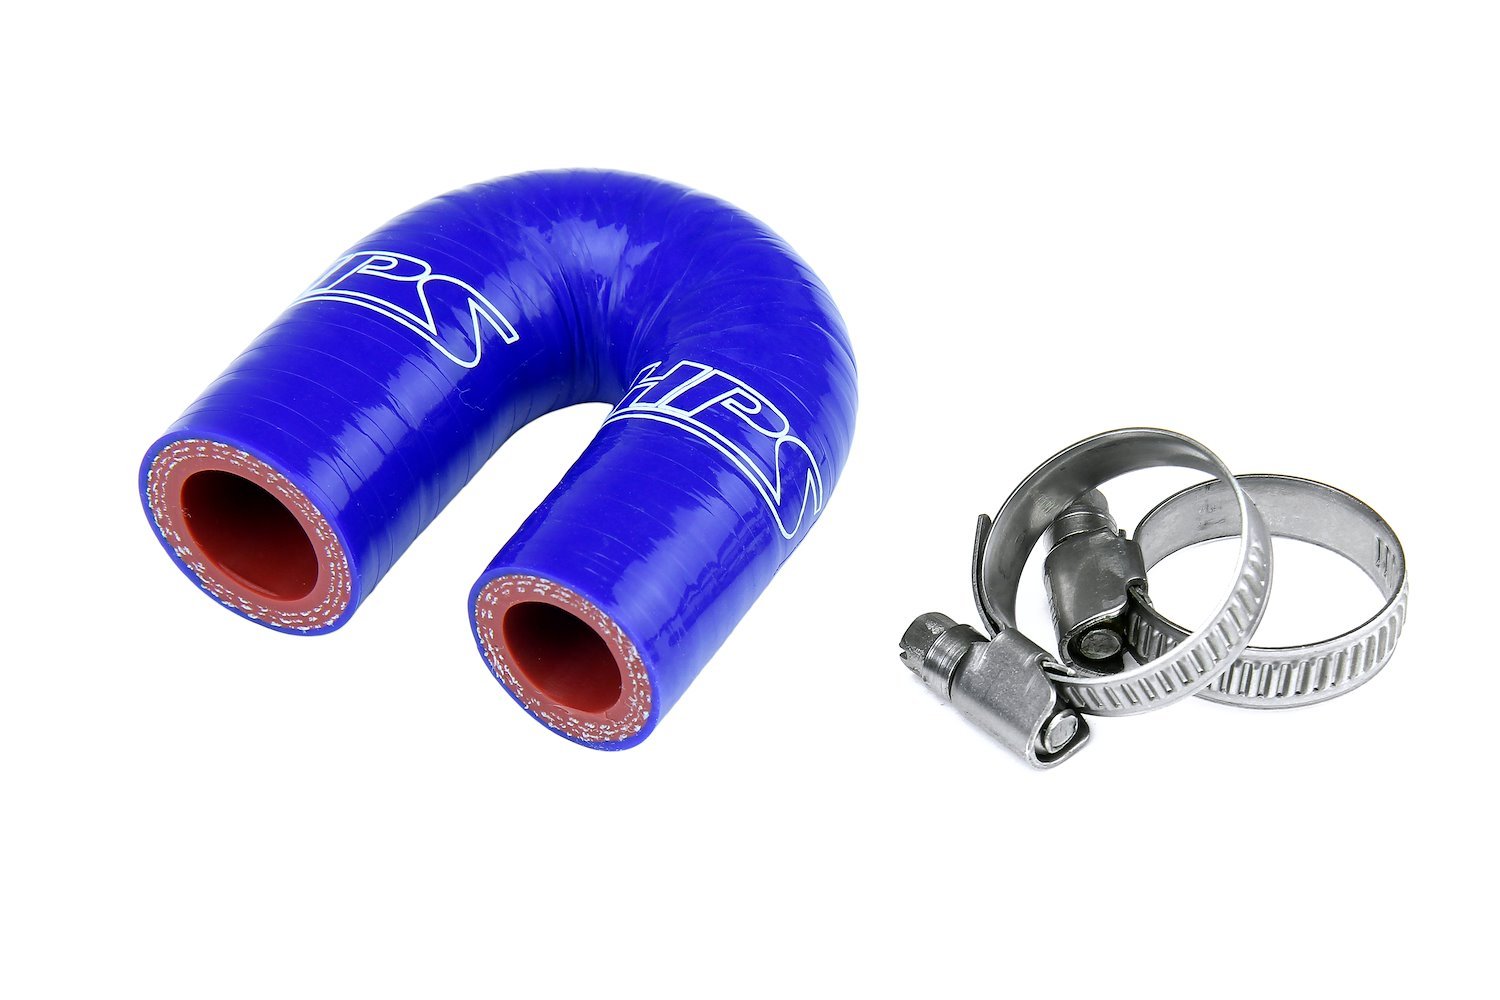 57-1864-BLUE Heater Bypass Hose Kit, 4-Ply Reinforced Silicone Loop To Bypass Cabin Heater